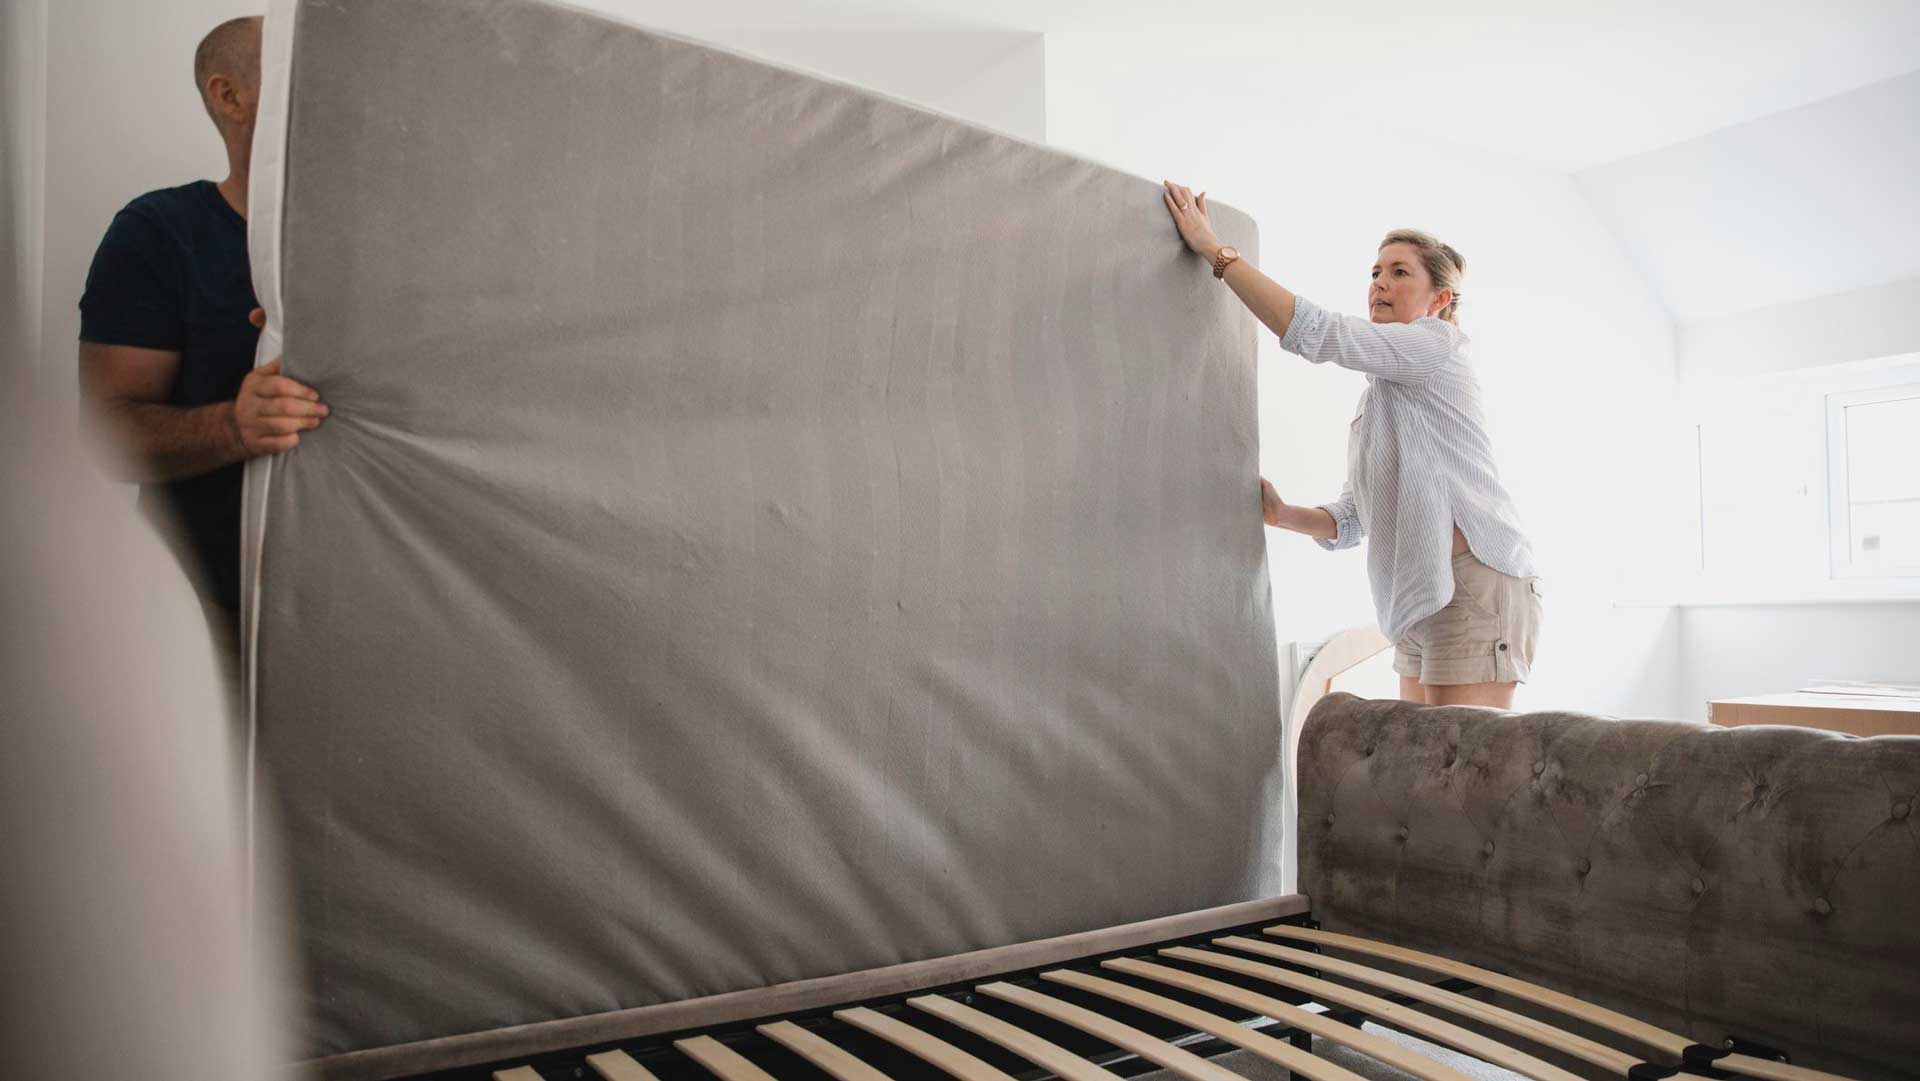 moving a mattress can be difficult without help